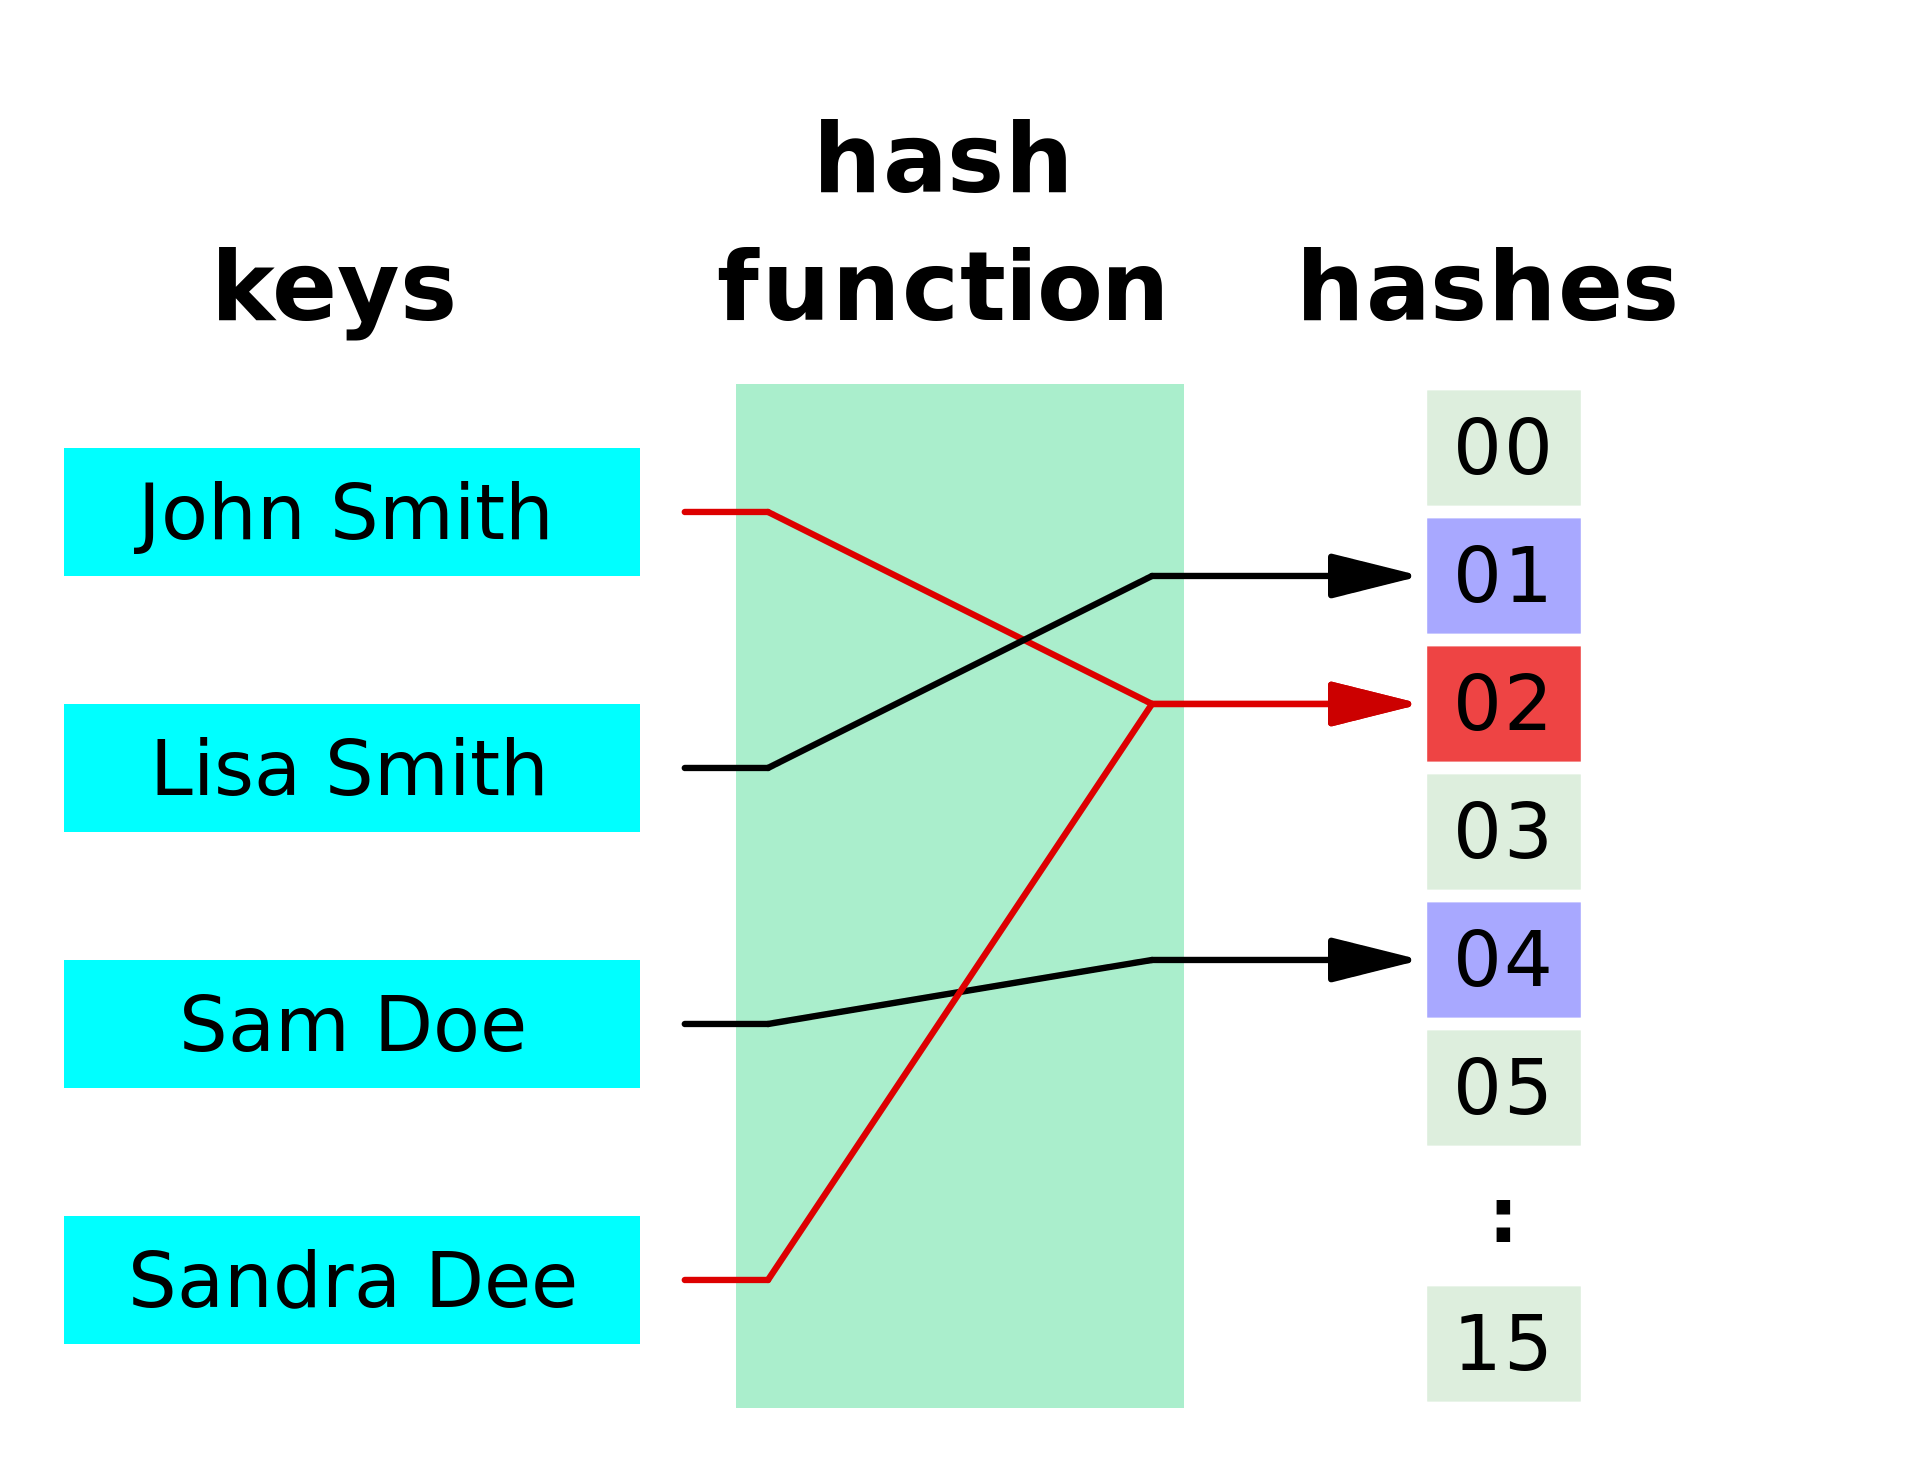 Diagram of a bad hash function with both the John Smith key and the Sandra Dee key going to the same 02